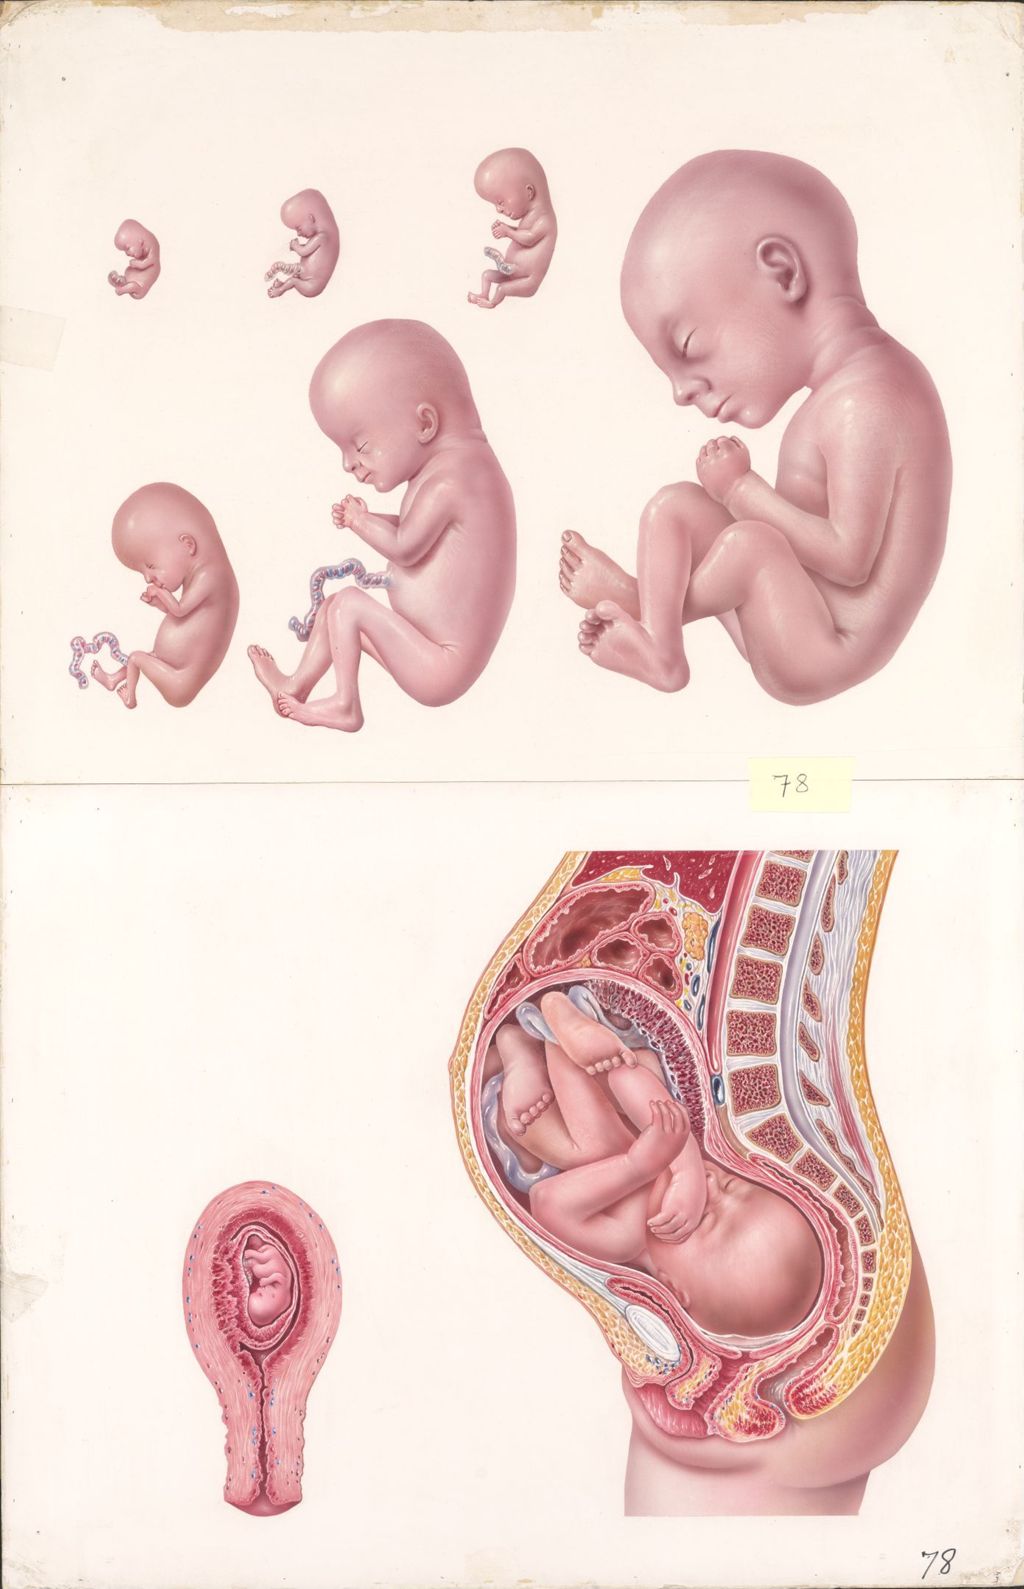 Miniature of Medical Profiles, Finished Art and Mechanical, Diuril and Hydrodiuril, Stages of Pregnancy